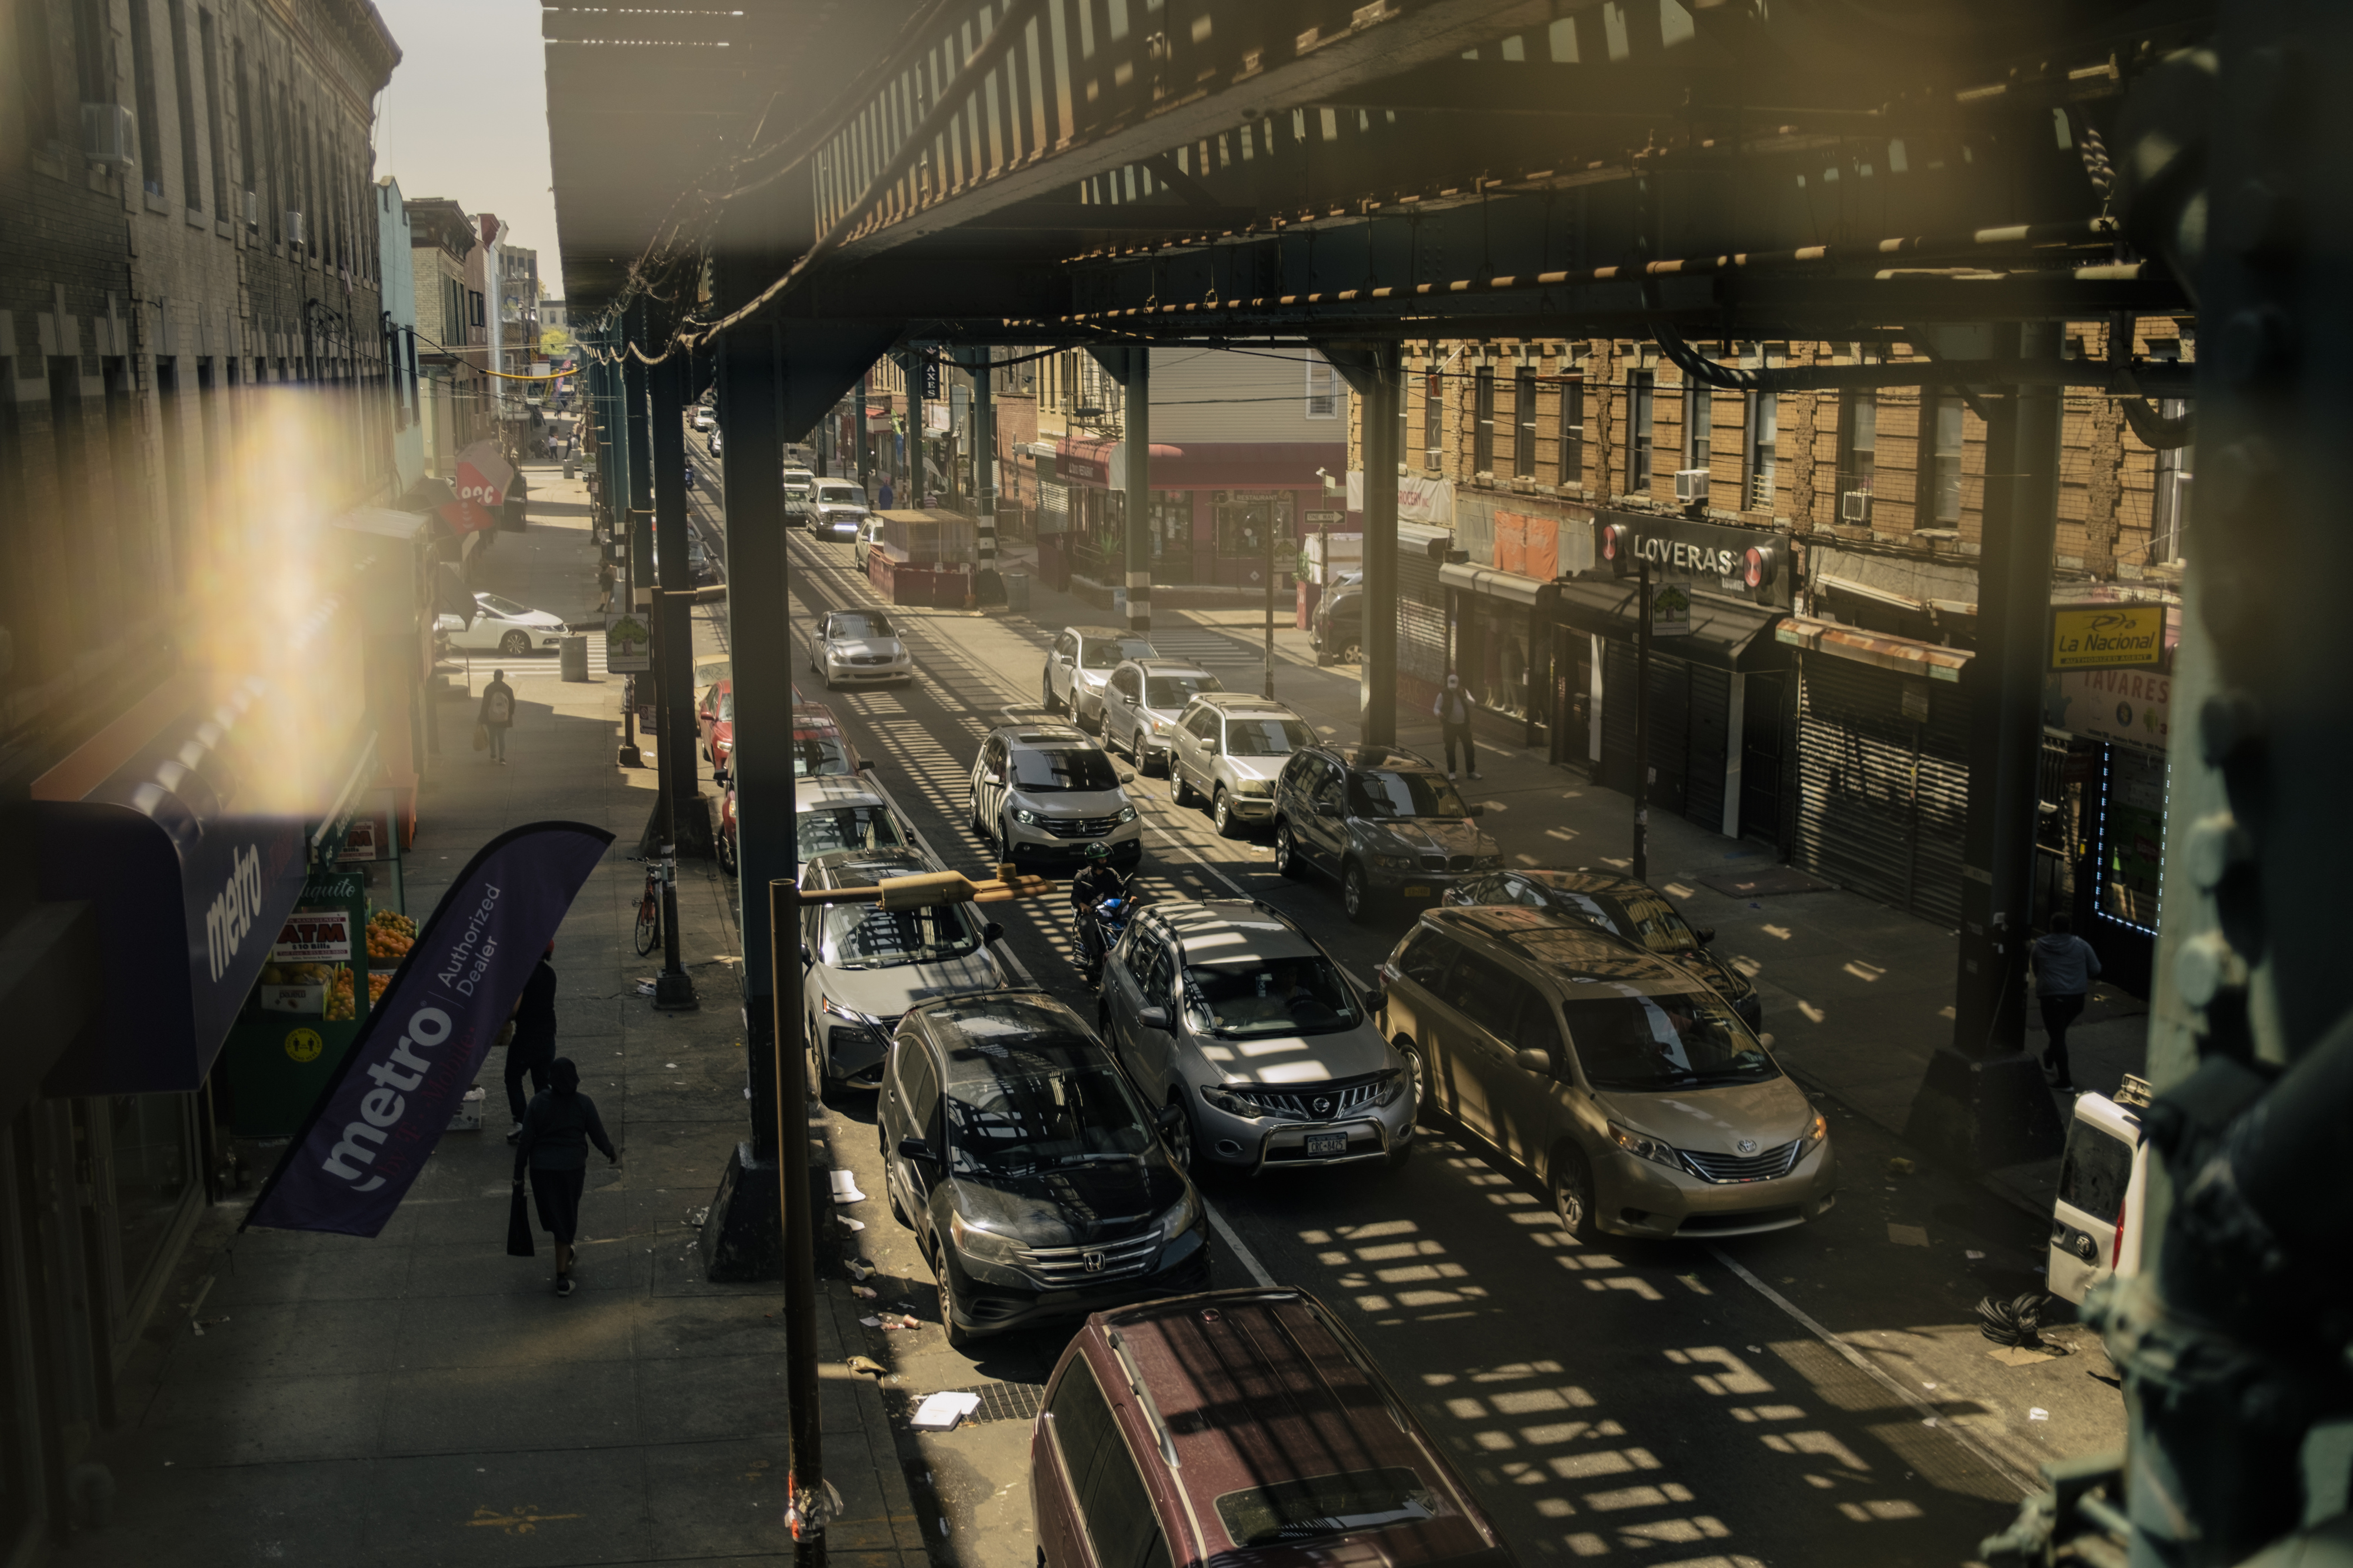 A bustling street in Cypress Hills, Brooklyn, with traffic moving under a subway track and shadows lining the street.